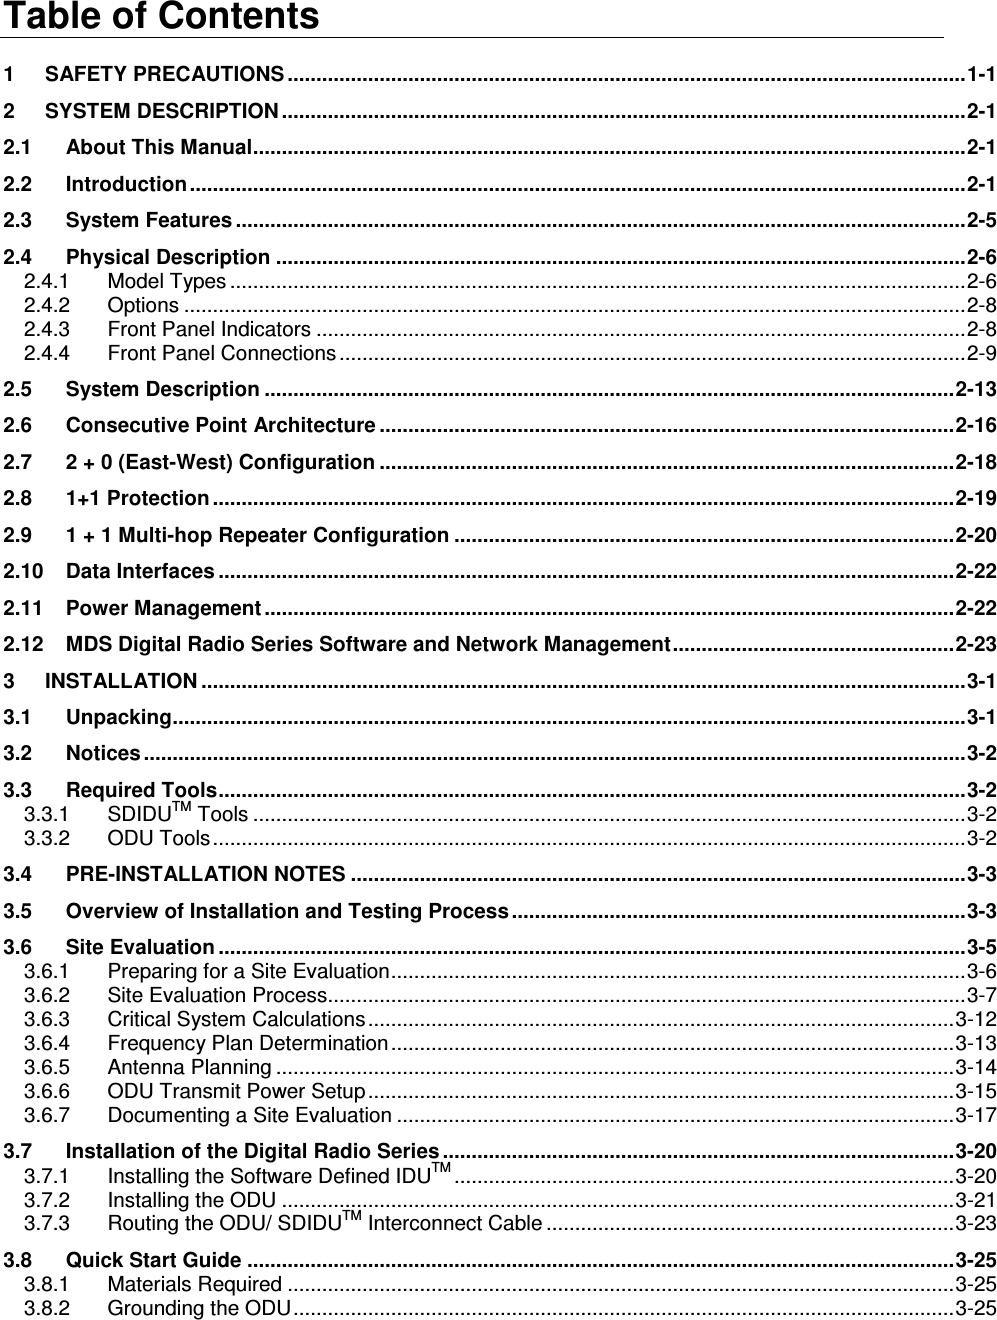 Table of Contents 1 SAFETY PRECAUTIONS ......................................................................................................................1-1 2 SYSTEM DESCRIPTION .......................................................................................................................2-1 2.1 About This Manual............................................................................................................................2-1 2.2 Introduction.......................................................................................................................................2-1 2.3 System Features ...............................................................................................................................2-5 2.4 Physical Description ........................................................................................................................2-6 2.4.1 Model Types ................................................................................................................................2-6 2.4.2 Options ........................................................................................................................................2-8 2.4.3 Front Panel Indicators .................................................................................................................2-8 2.4.4 Front Panel Connections .............................................................................................................2-9 2.5 System Description ........................................................................................................................2-13 2.6 Consecutive Point Architecture ....................................................................................................2-16 2.7 2 + 0 (East-West) Configuration ....................................................................................................2-18 2.8 1+1 Protection .................................................................................................................................2-19 2.9 1 + 1 Multi-hop Repeater Configuration .......................................................................................2-20 2.10 Data Interfaces ................................................................................................................................2-22 2.11 Power Management ........................................................................................................................2-22 2.12 MDS Digital Radio Series Software and Network Management.................................................2-23 3 INSTALLATION .....................................................................................................................................3-1 3.1 Unpacking..........................................................................................................................................3-1 3.2 Notices ...............................................................................................................................................3-2 3.3 Required Tools..................................................................................................................................3-2 3.3.1 SDIDUTM Tools ............................................................................................................................3-2 3.3.2 ODU Tools...................................................................................................................................3-2 3.4 PRE-INSTALLATION NOTES ...........................................................................................................3-3 3.5 Overview of Installation and Testing Process ...............................................................................3-3 3.6 Site Evaluation ..................................................................................................................................3-5 3.6.1 Preparing for a Site Evaluation....................................................................................................3-6 3.6.2 Site Evaluation Process...............................................................................................................3-7 3.6.3 Critical System Calculations......................................................................................................3-12 3.6.4 Frequency Plan Determination..................................................................................................3-13 3.6.5 Antenna Planning ......................................................................................................................3-14 3.6.6 ODU Transmit Power Setup ......................................................................................................3-15 3.6.7 Documenting a Site Evaluation .................................................................................................3-17 3.7 Installation of the Digital Radio Series .........................................................................................3-20 3.7.1 Installing the Software Defined IDUTM .......................................................................................3-20 3.7.2 Installing the ODU .....................................................................................................................3-21 3.7.3 Routing the ODU/ SDIDUTM Interconnect Cable .......................................................................3-23 3.8 Quick Start Guide ...........................................................................................................................3-25 3.8.1 Materials Required ....................................................................................................................3-25 3.8.2 Grounding the ODU...................................................................................................................3-25 